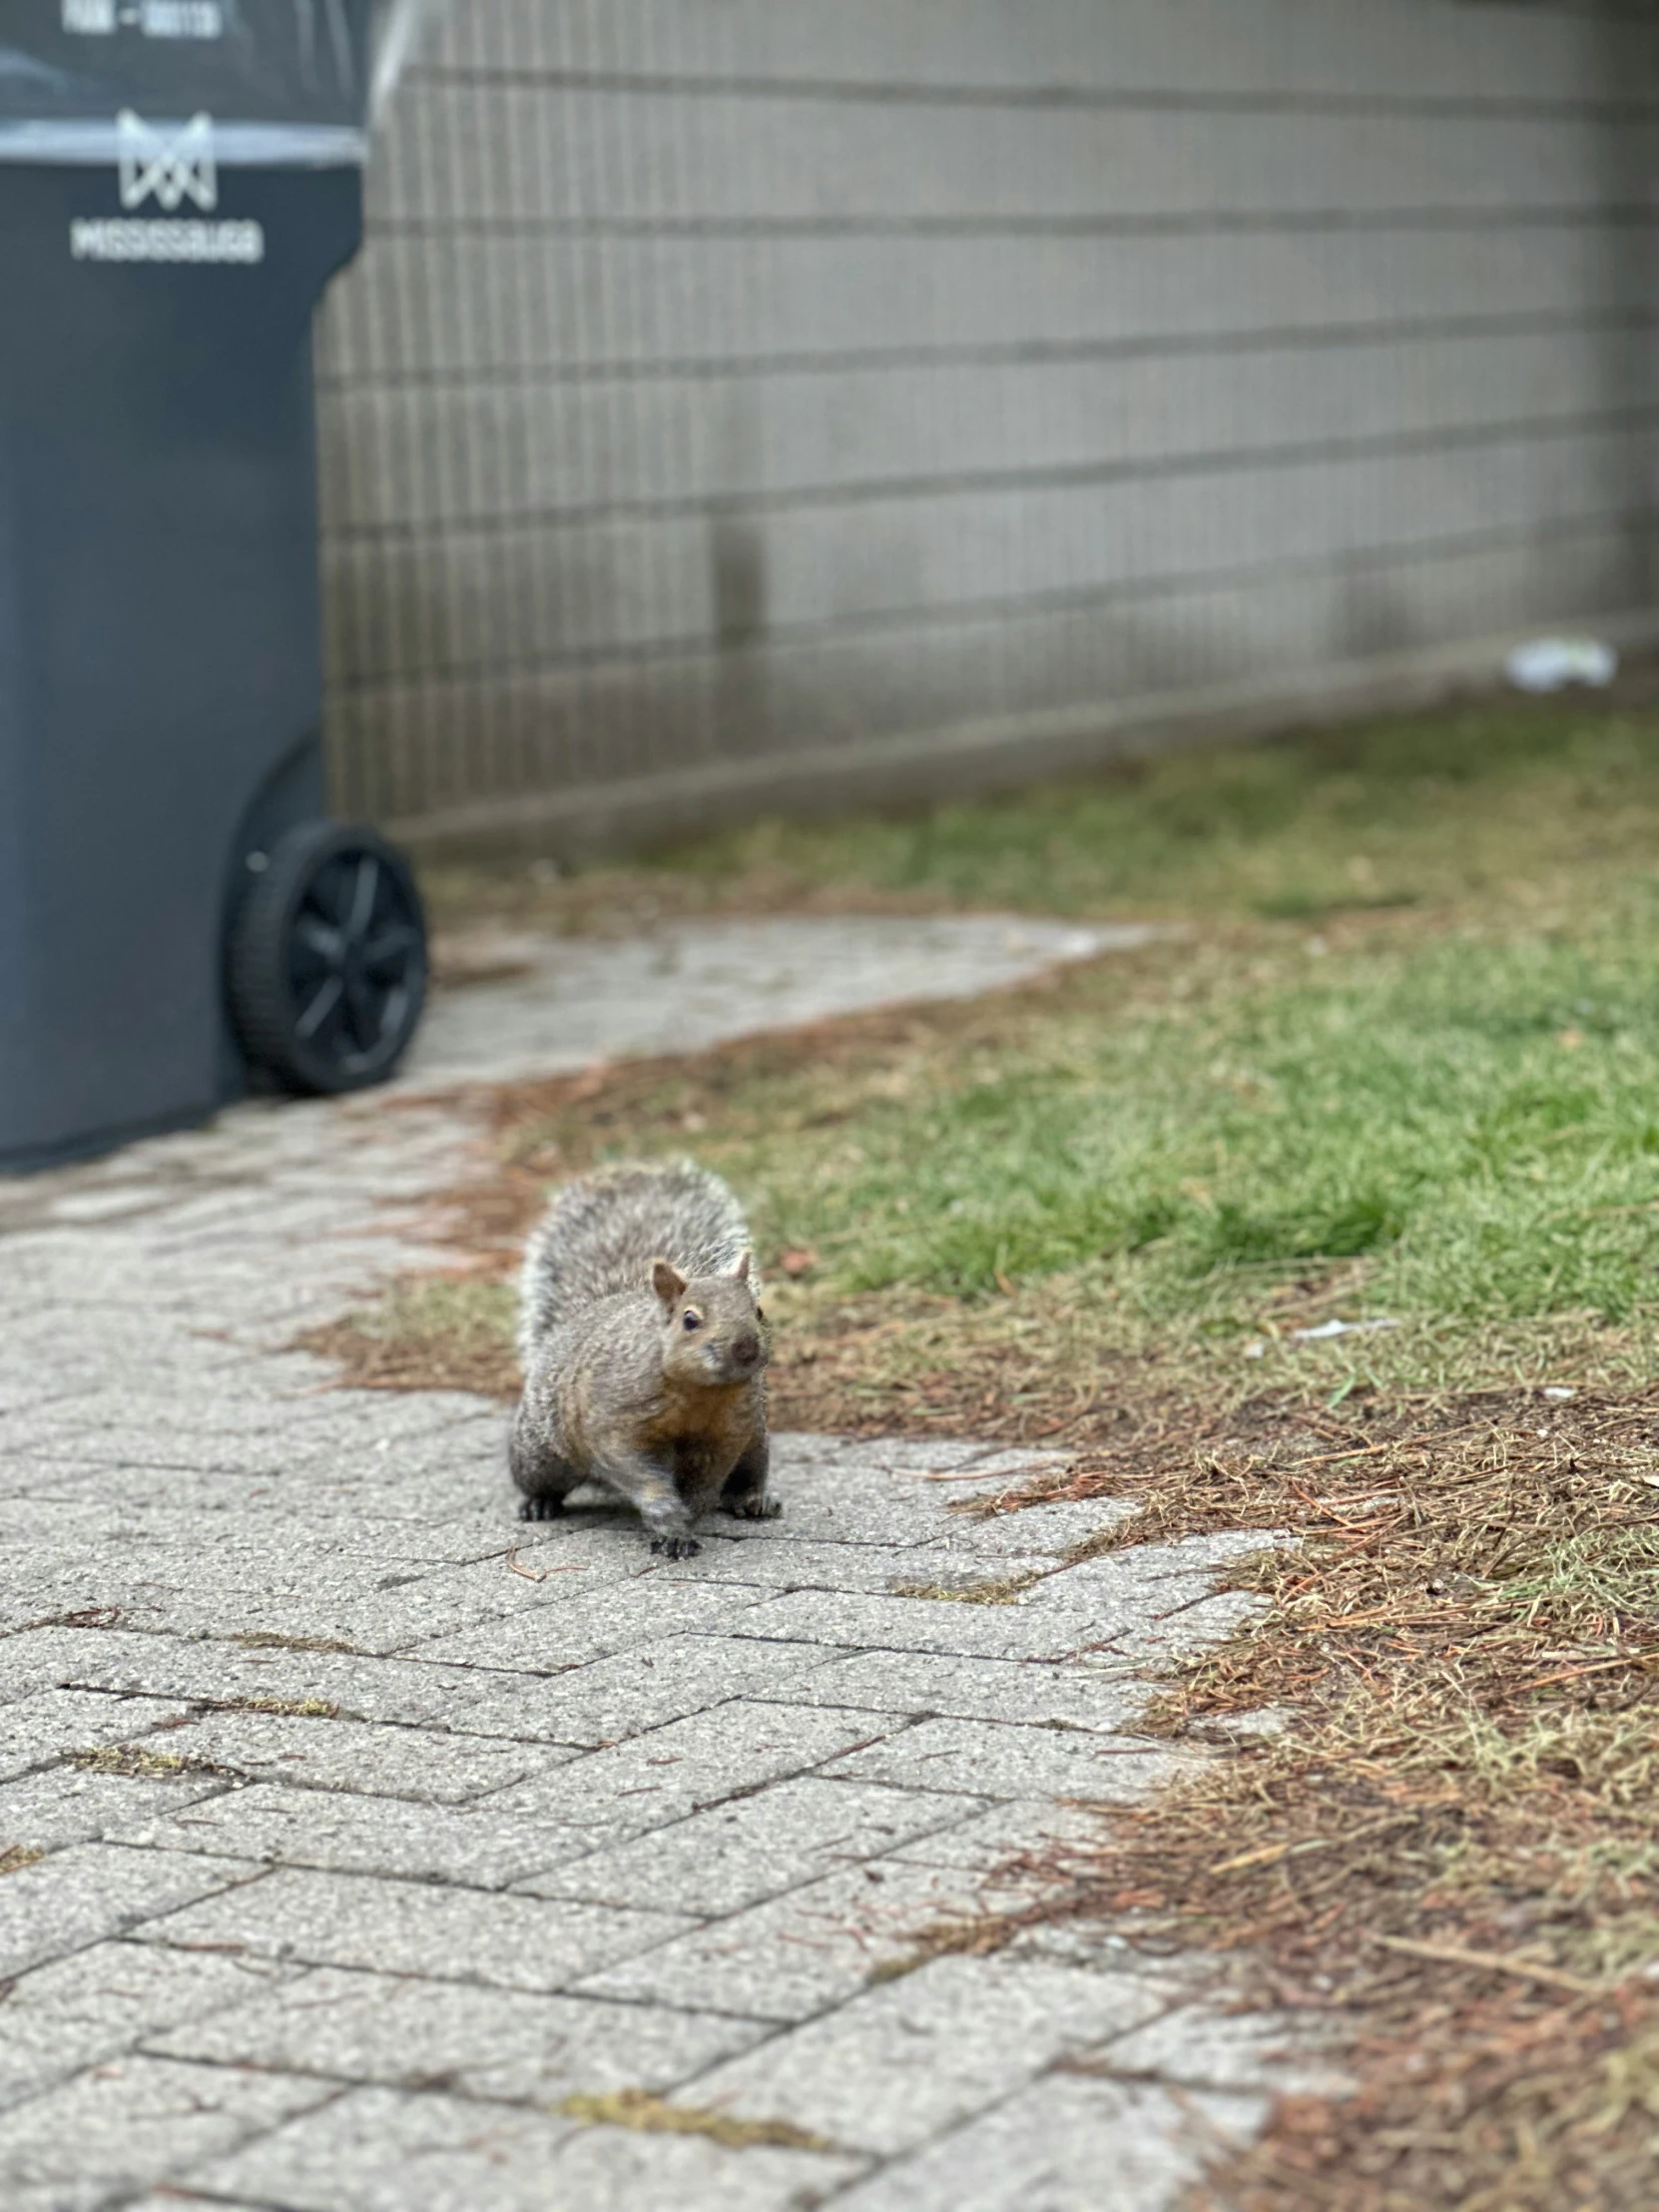 a squirrel running on the ground towards a trash can